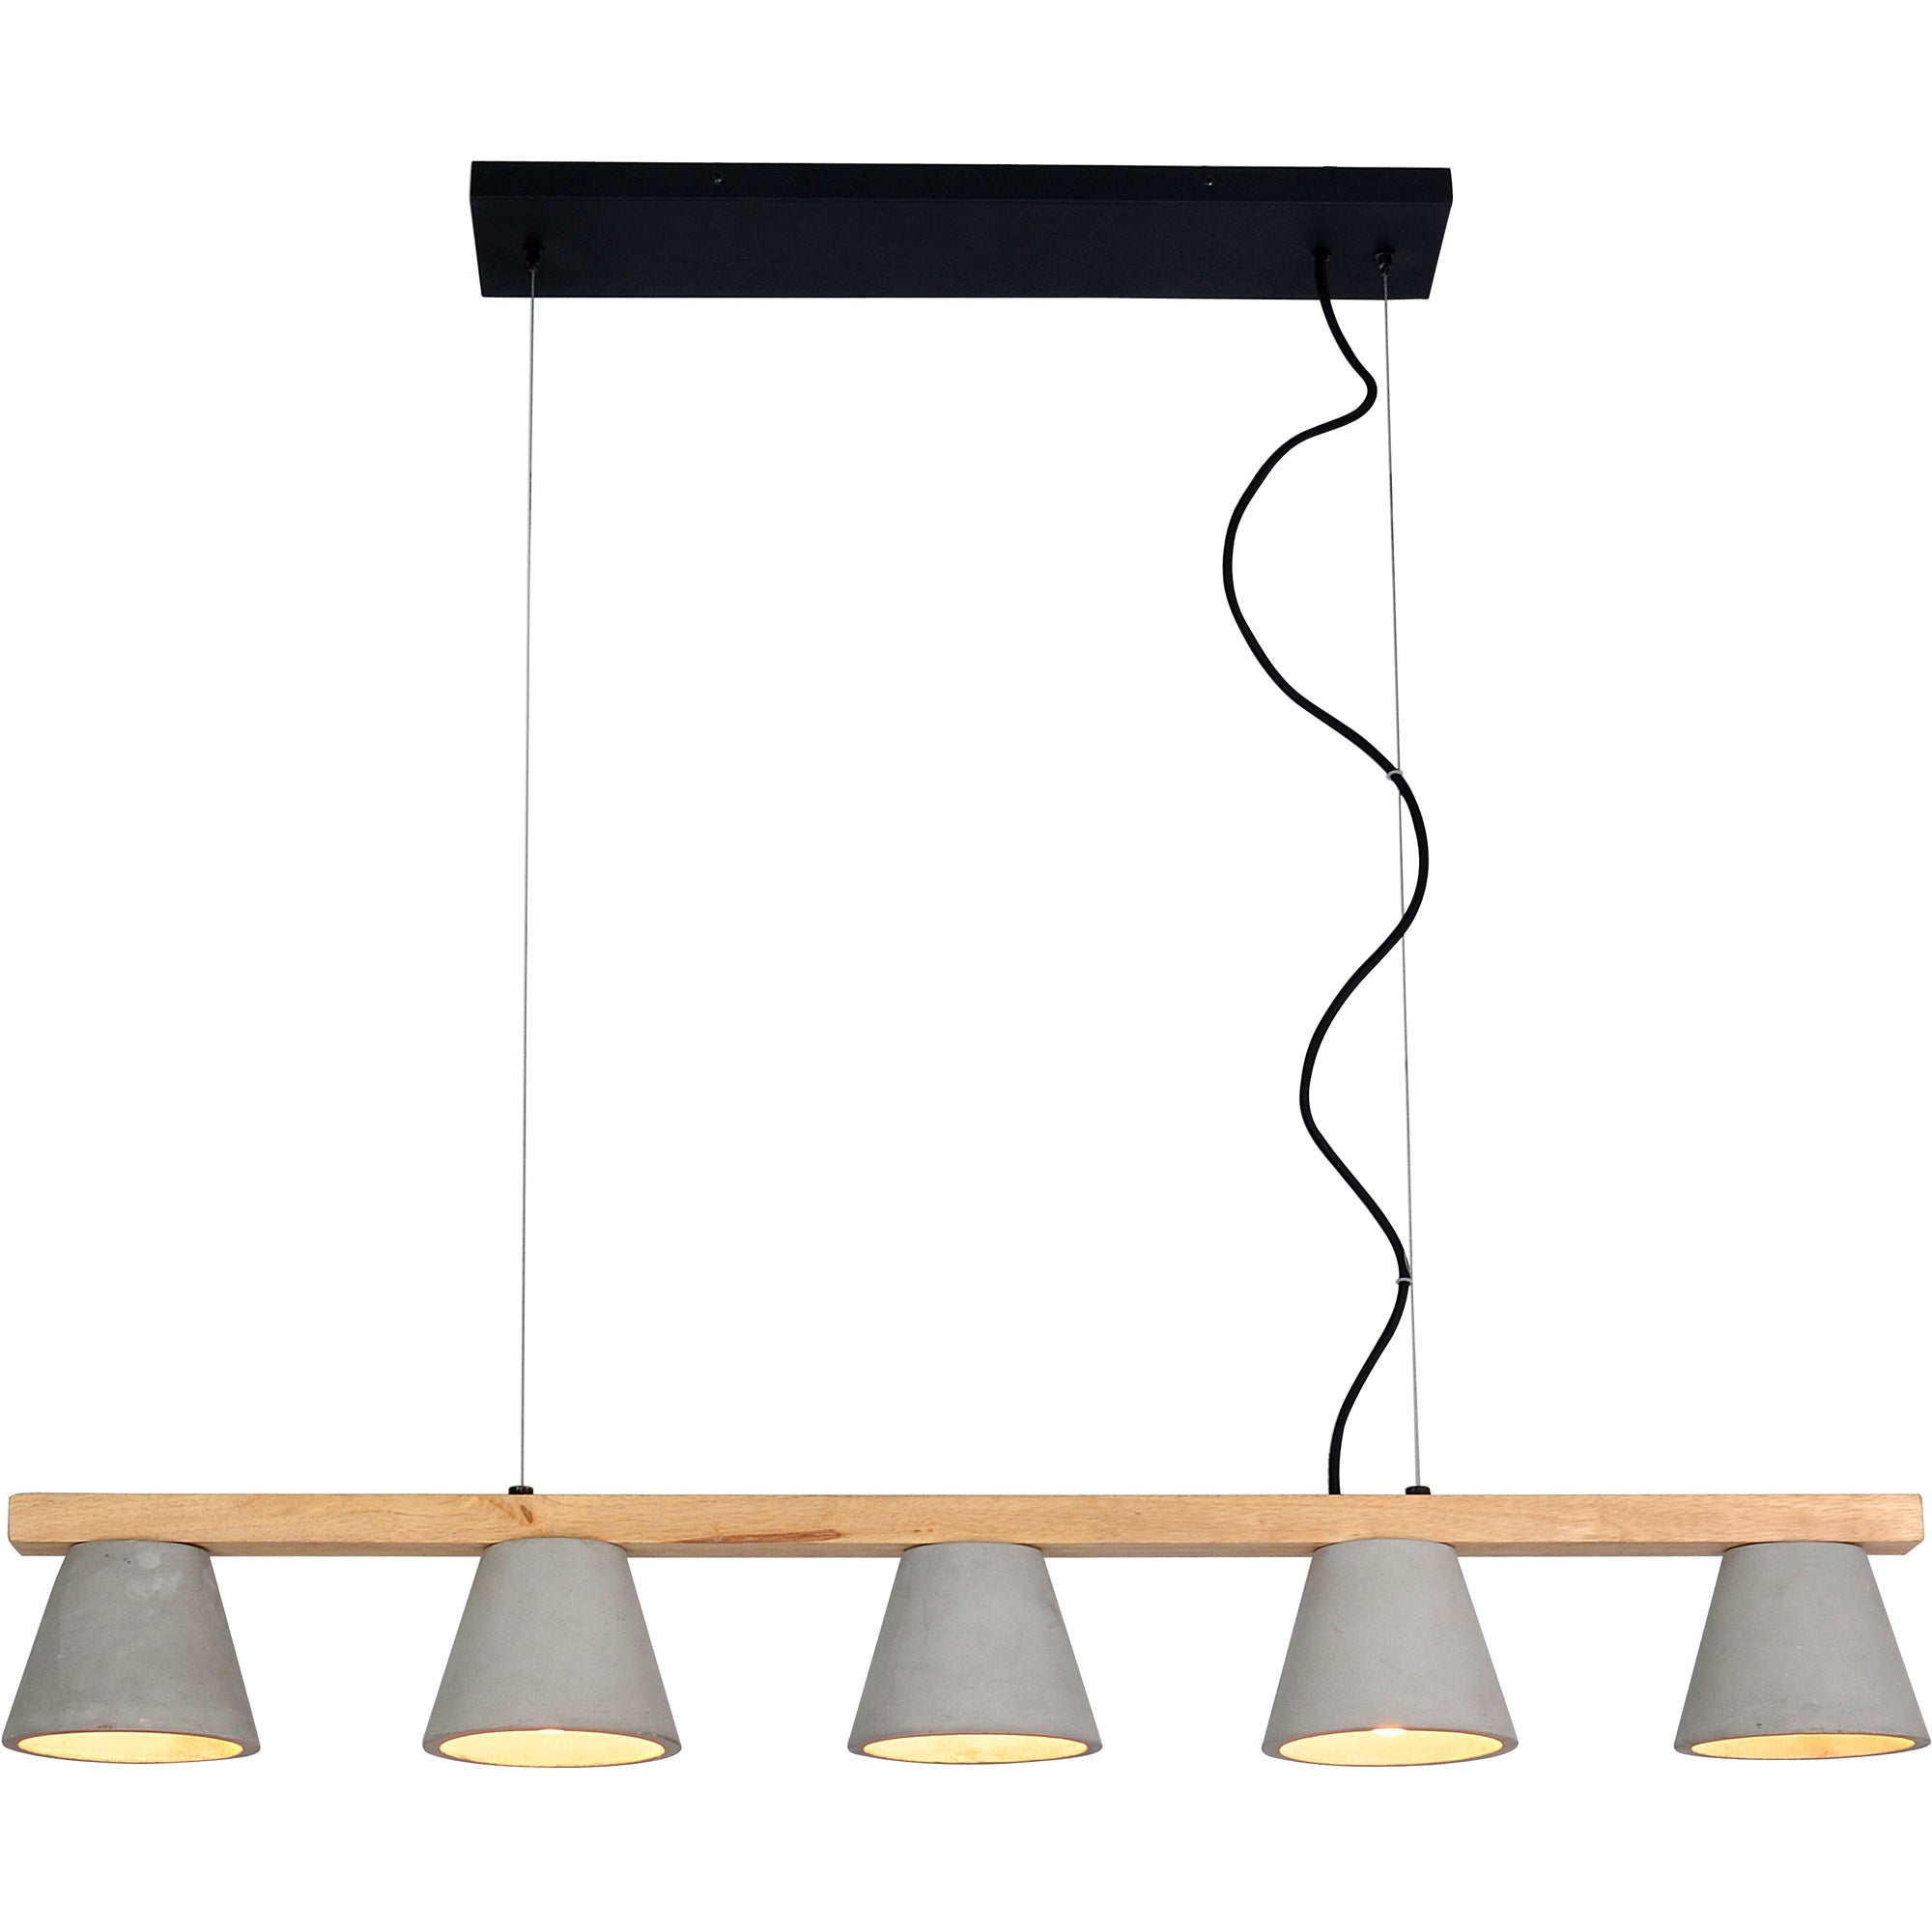 5 Light Chandelier with Grey Concrete Shades